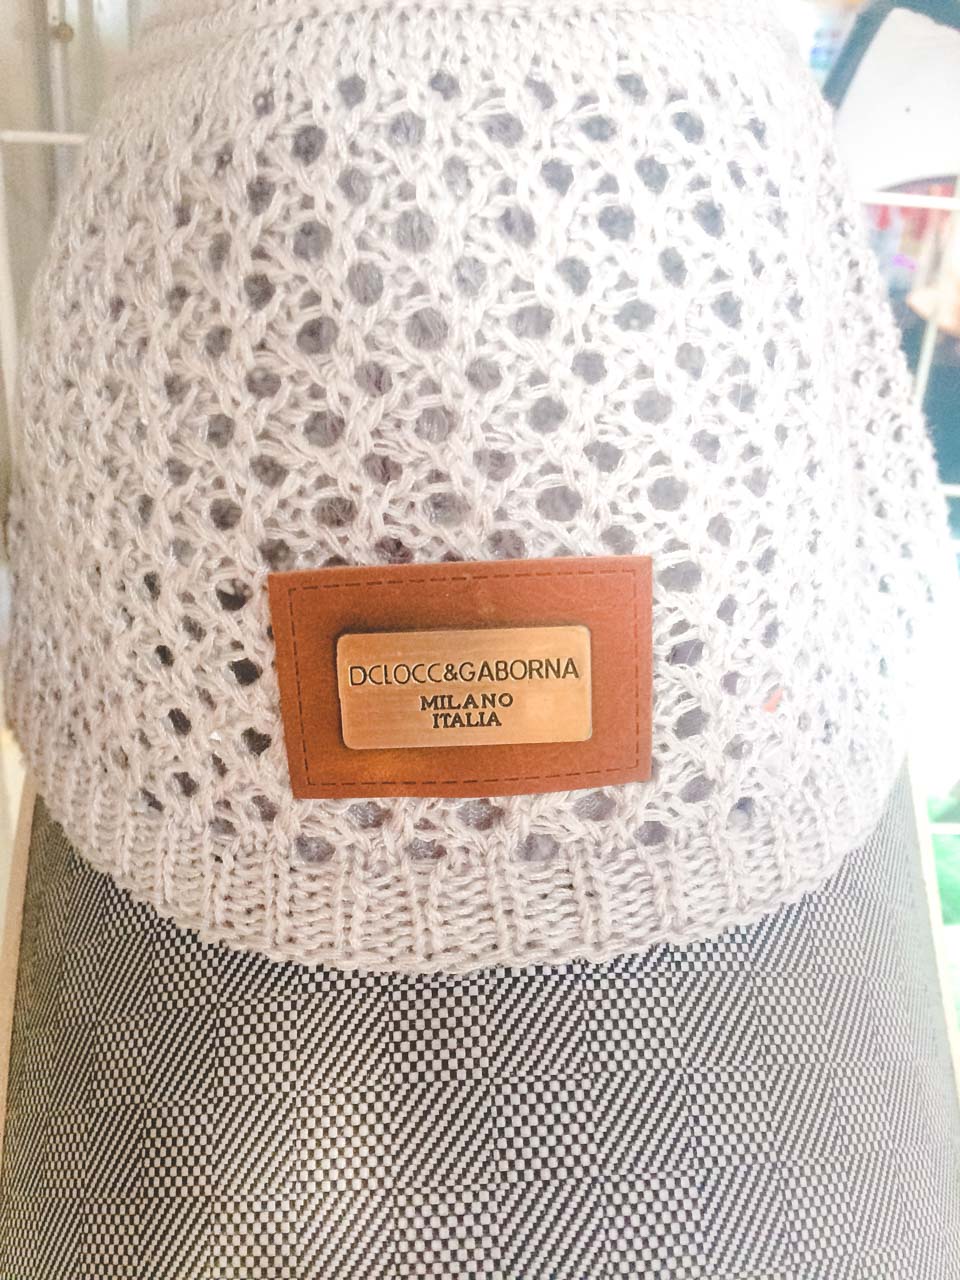 Crochet bucket hat with a metal plate saying "DClocc & Gaborna Milano Italia" at a shop in Beijing